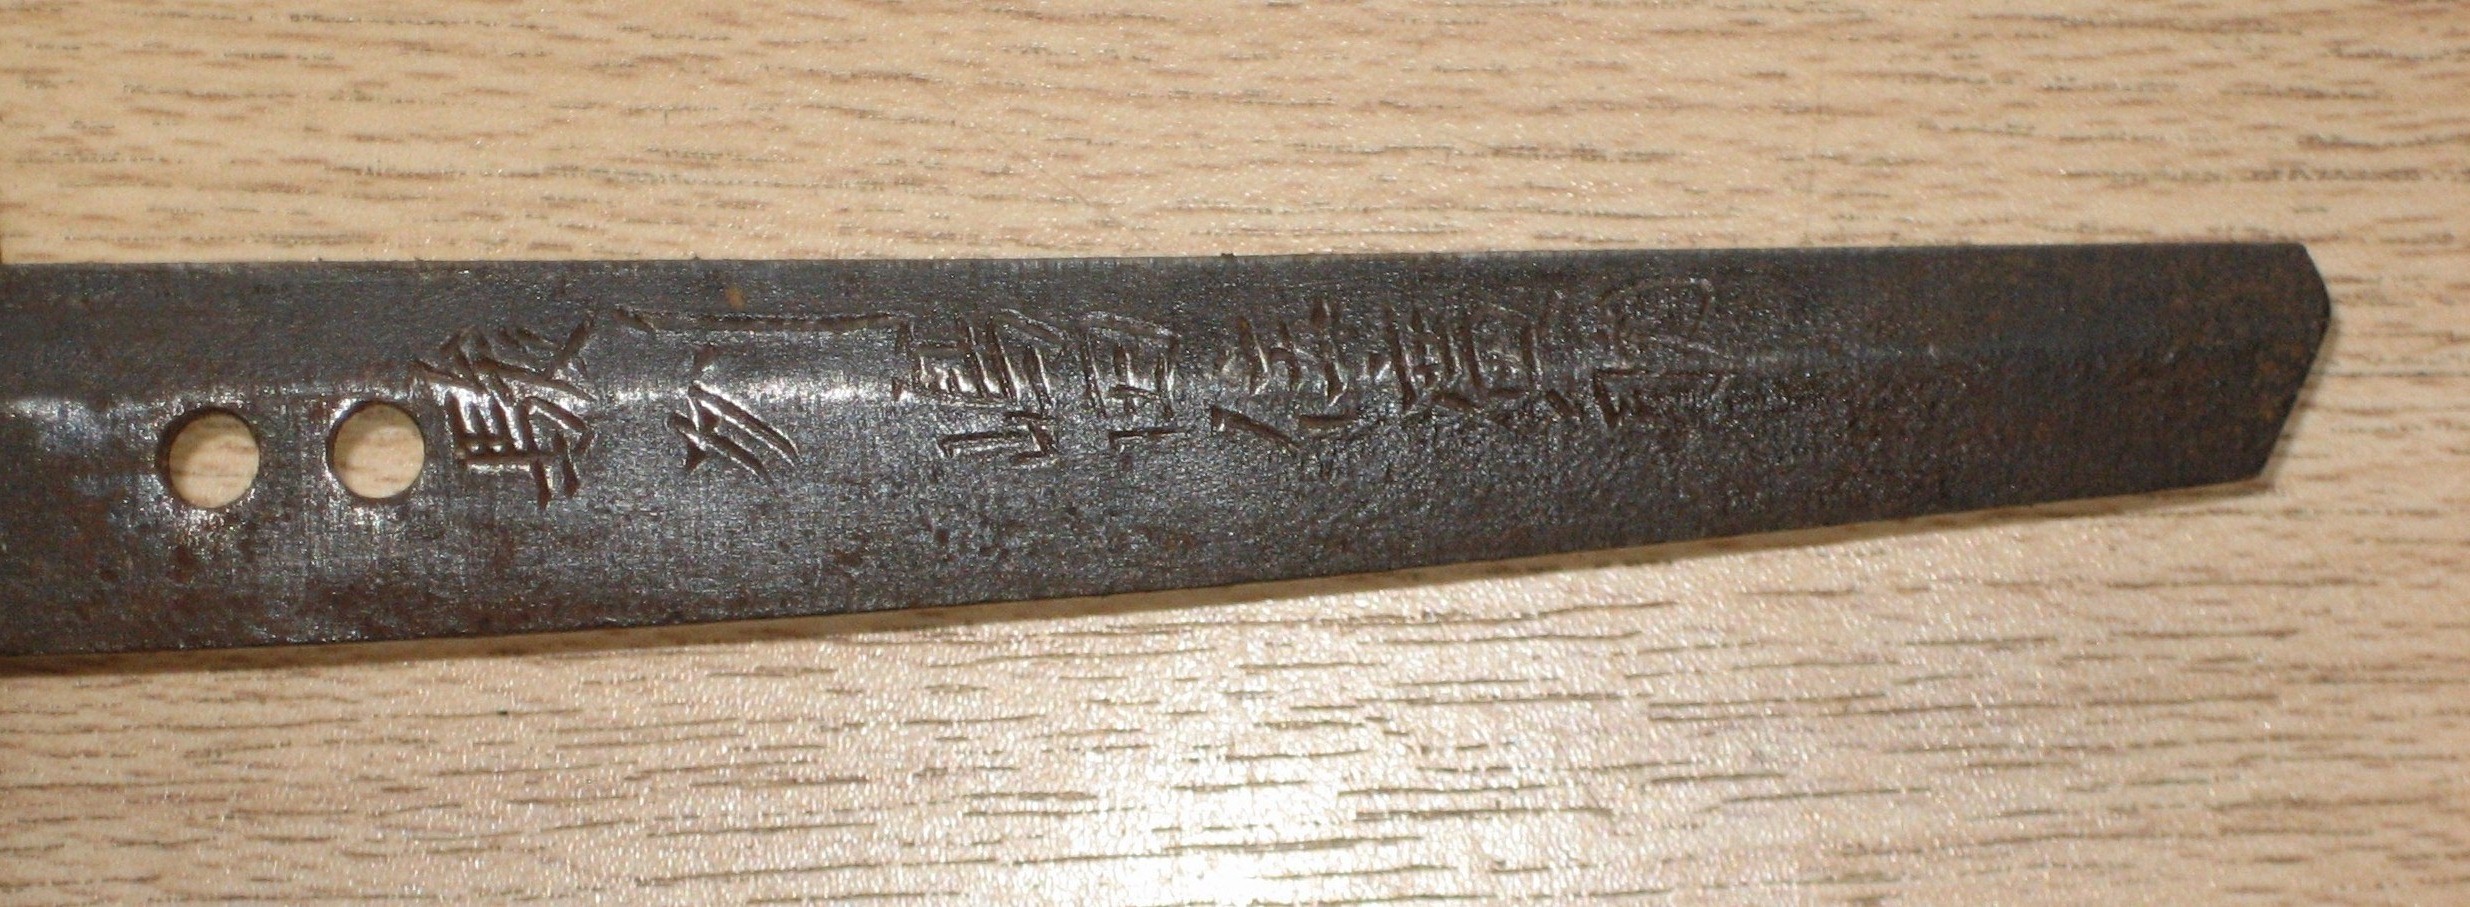 Tang of Japanese Sword - showing inscriptions